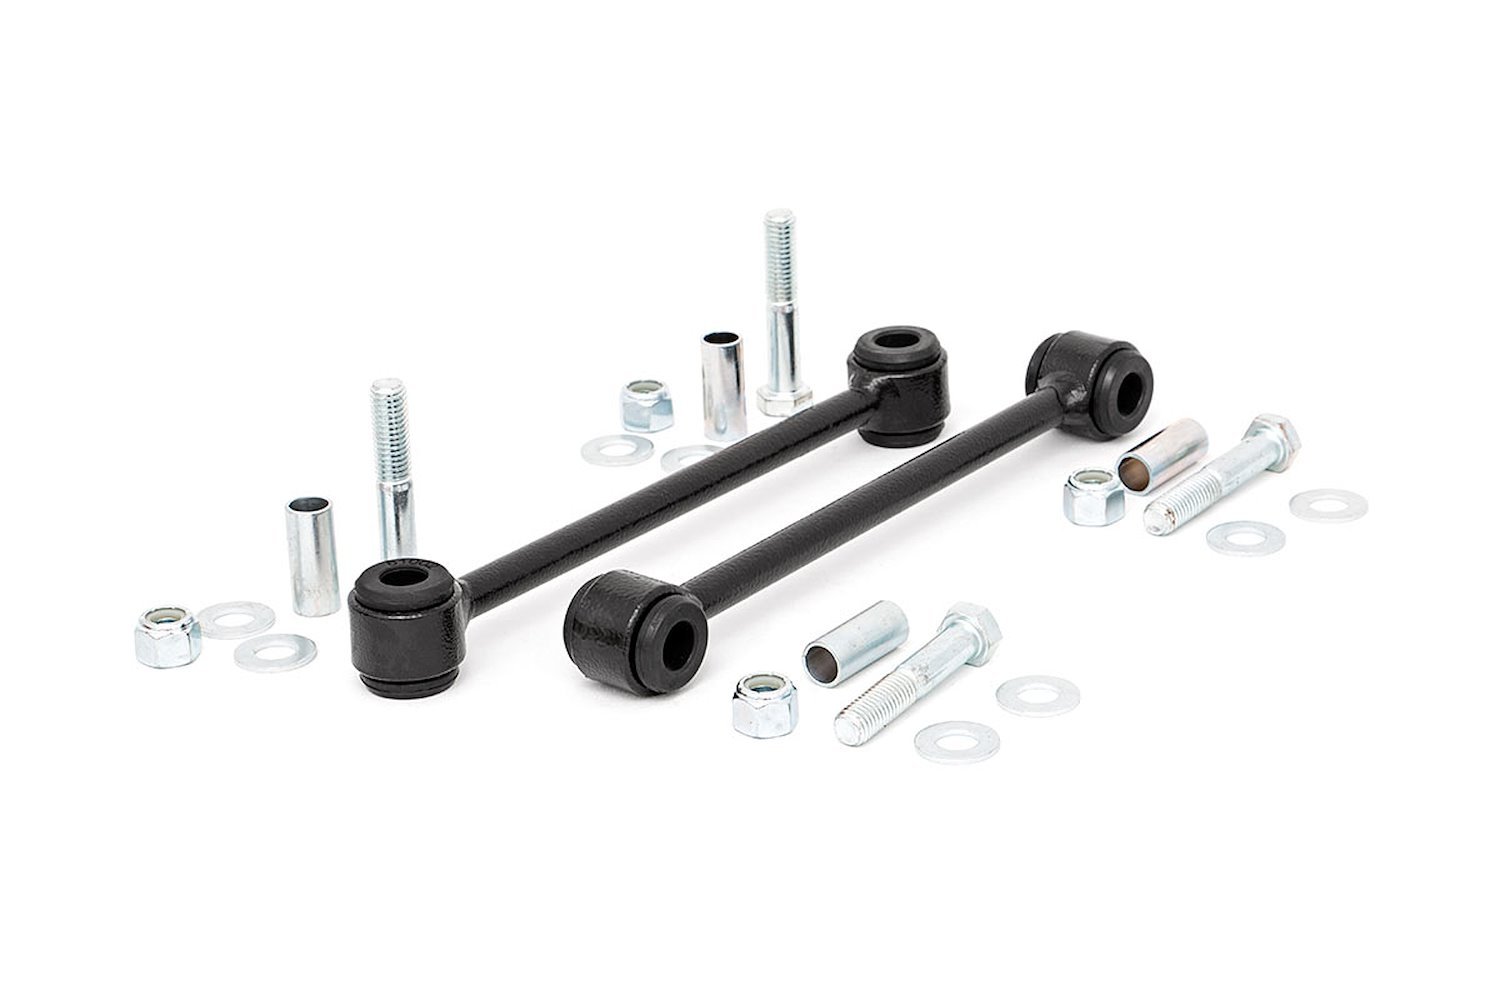 1134 Rear Sway Bar Endlinks for 2.5-inch Lifts